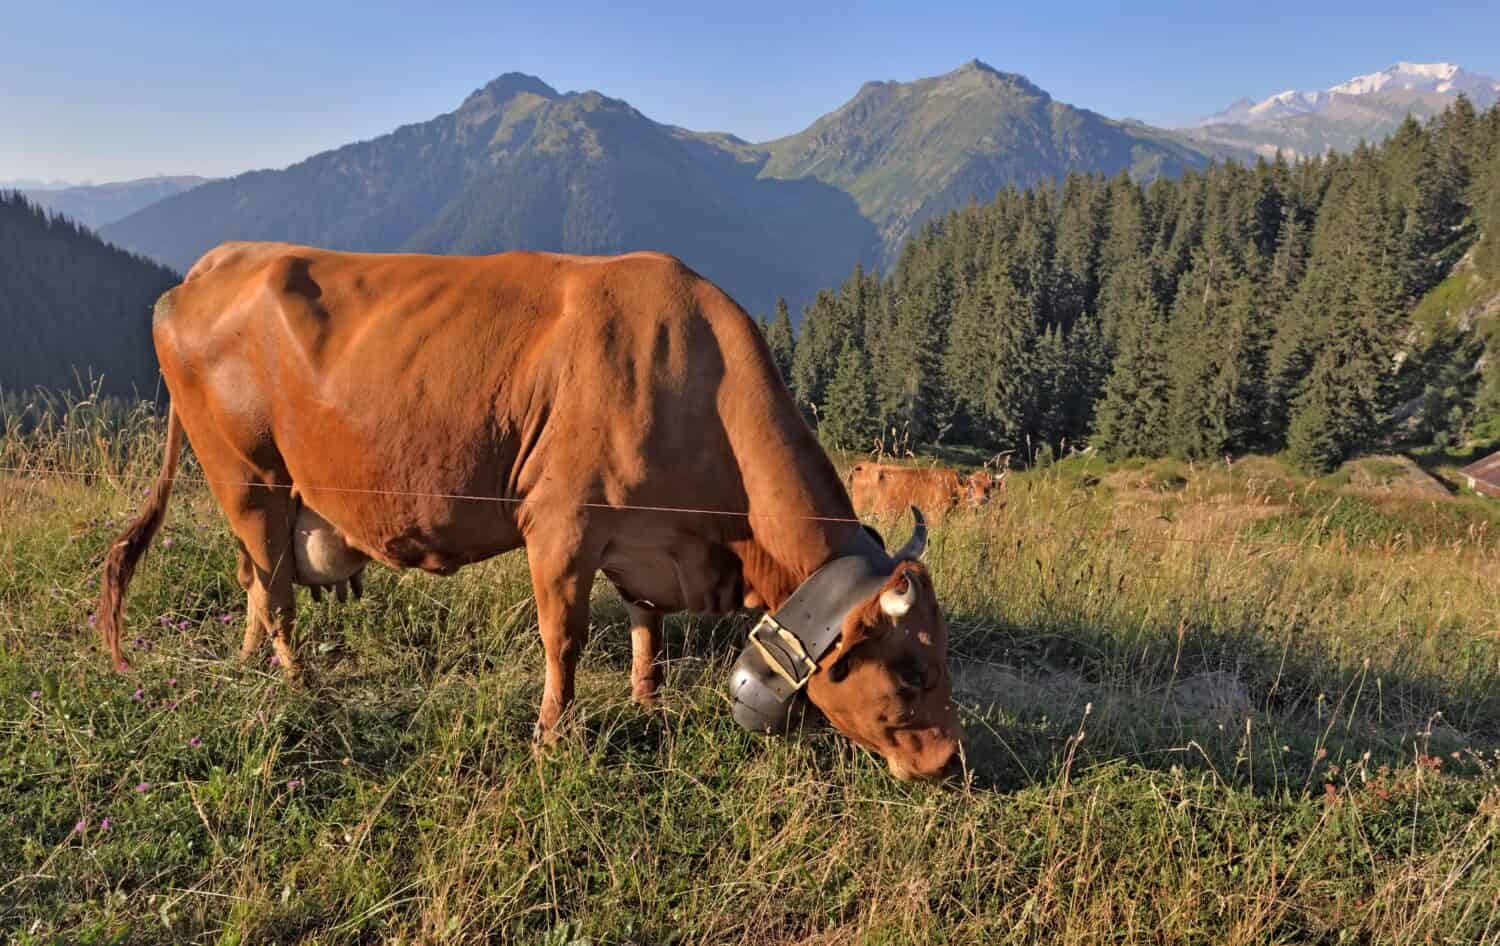 brown milk cow wearing a collar with a bell grazing in alpine pasture with mountain background